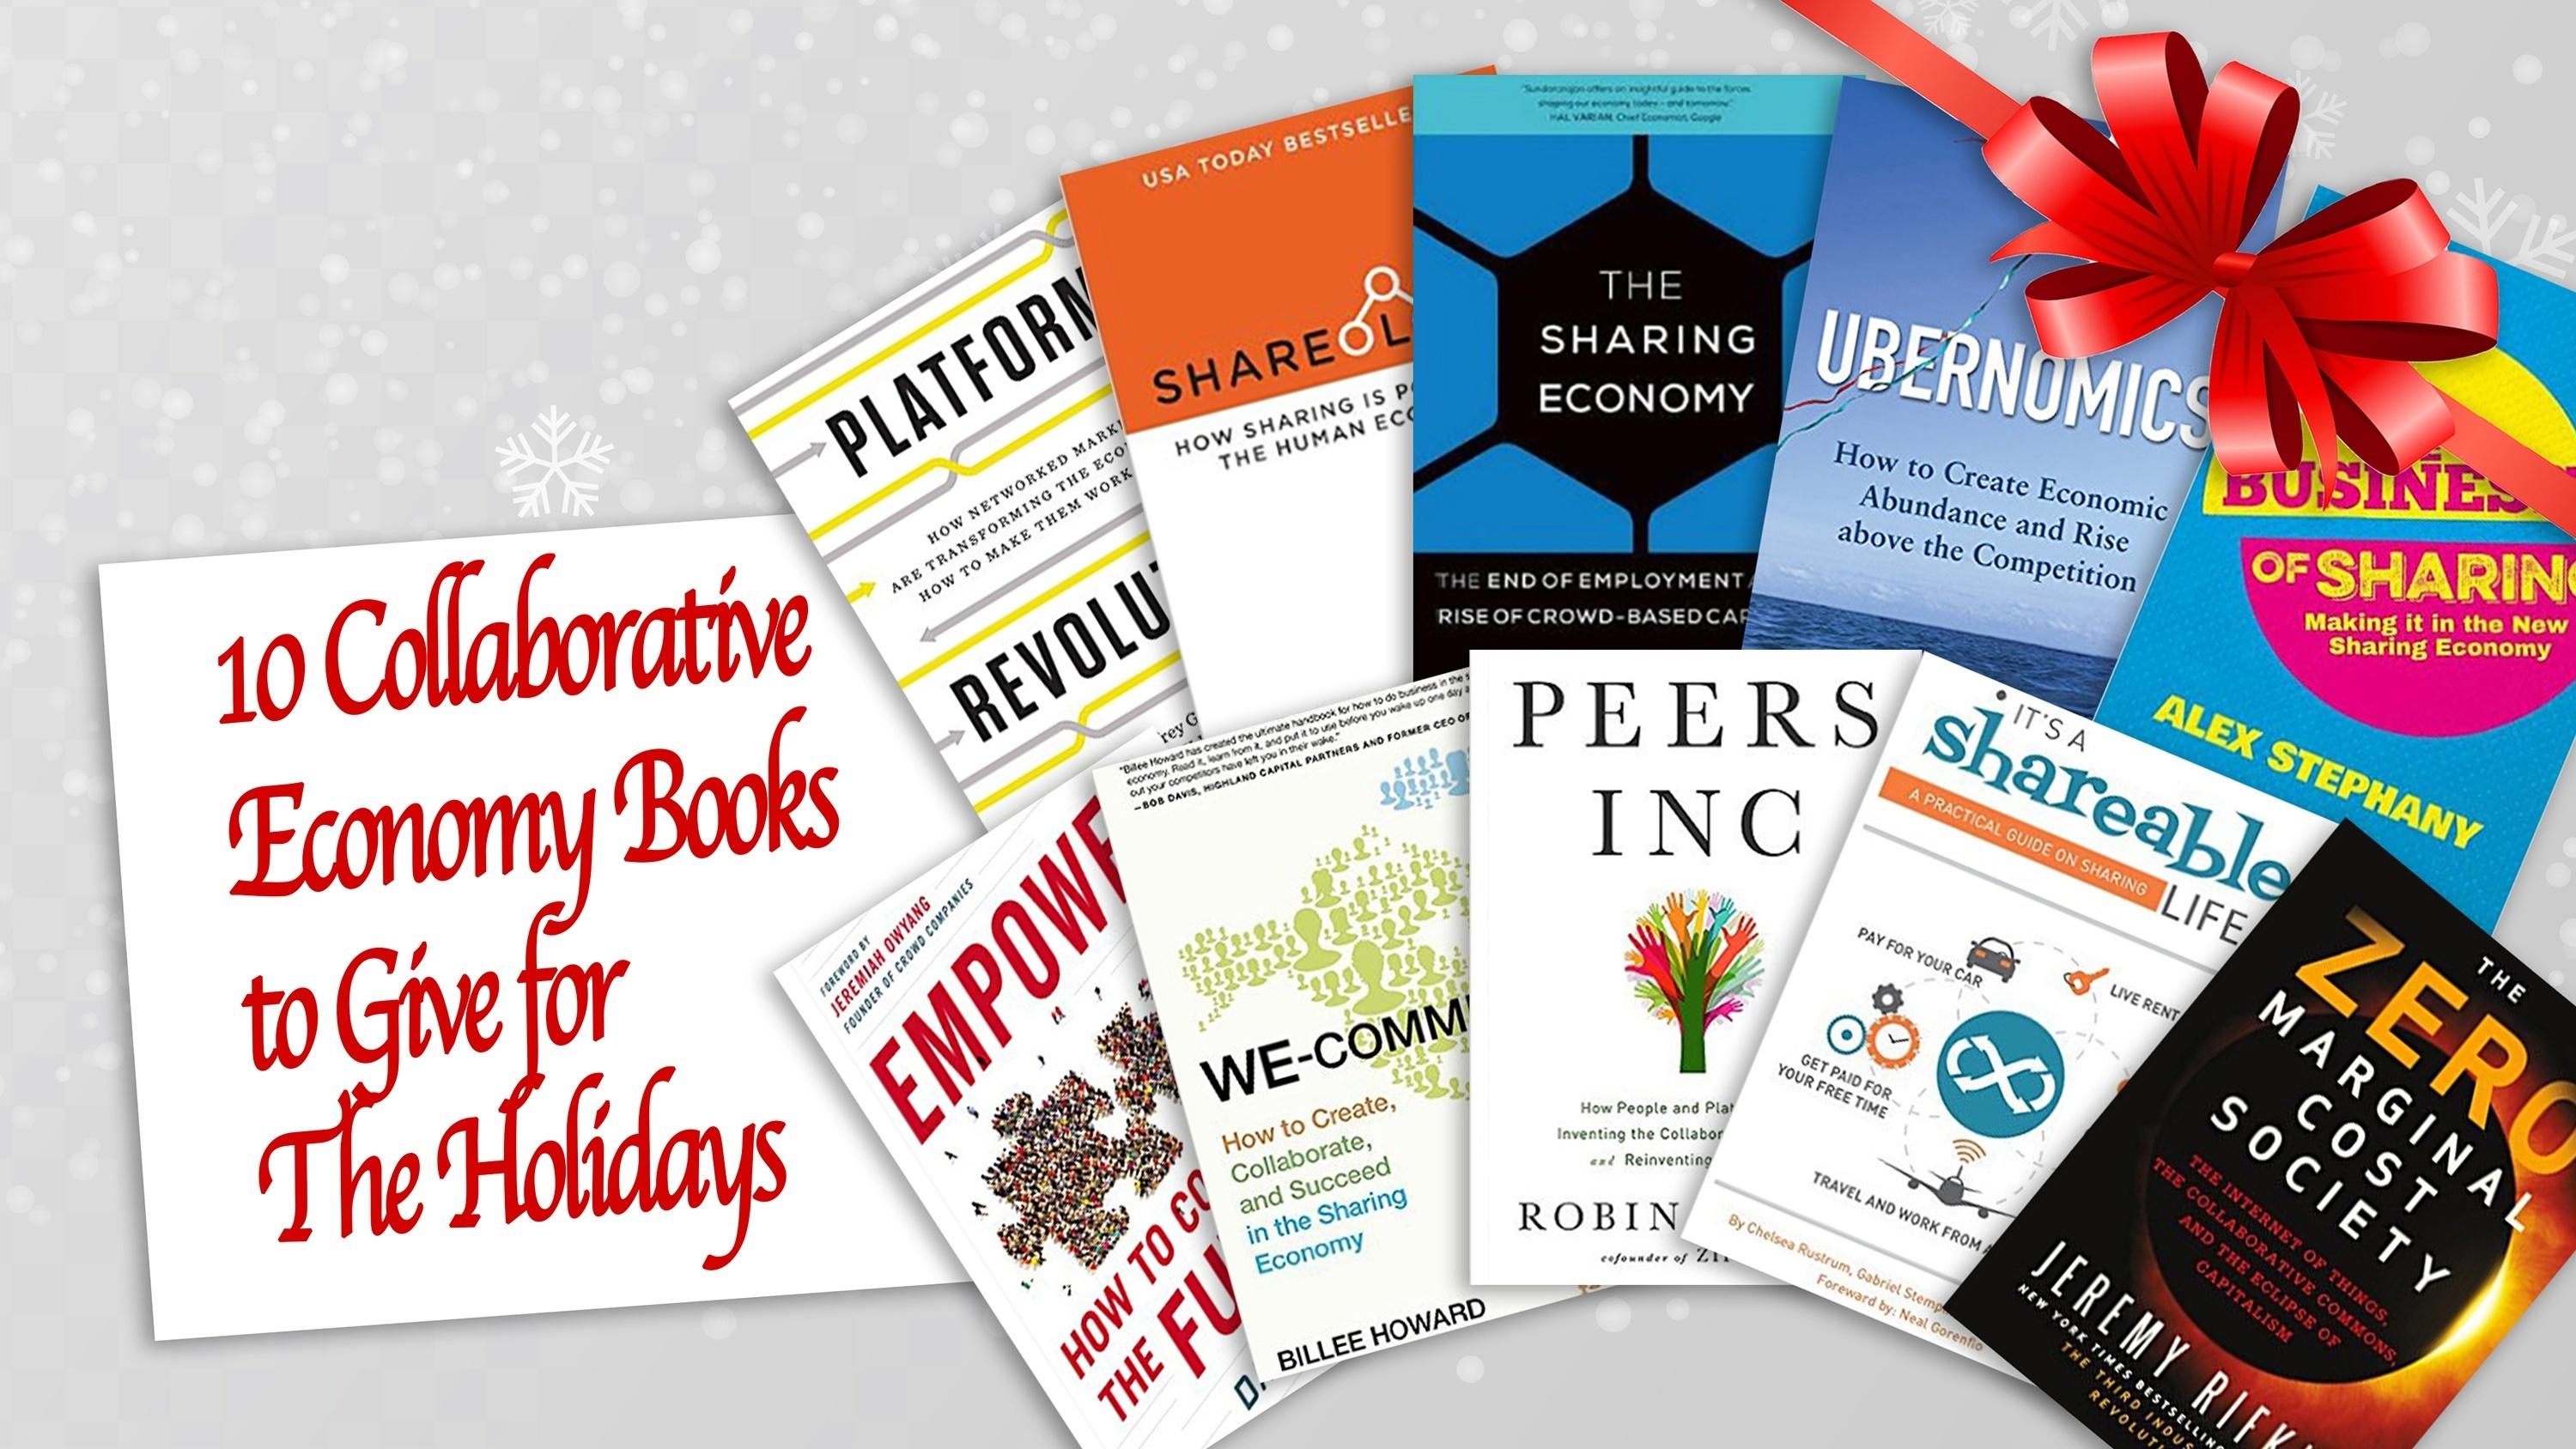 10 Collaborative Economy Books to Give for The Holidays